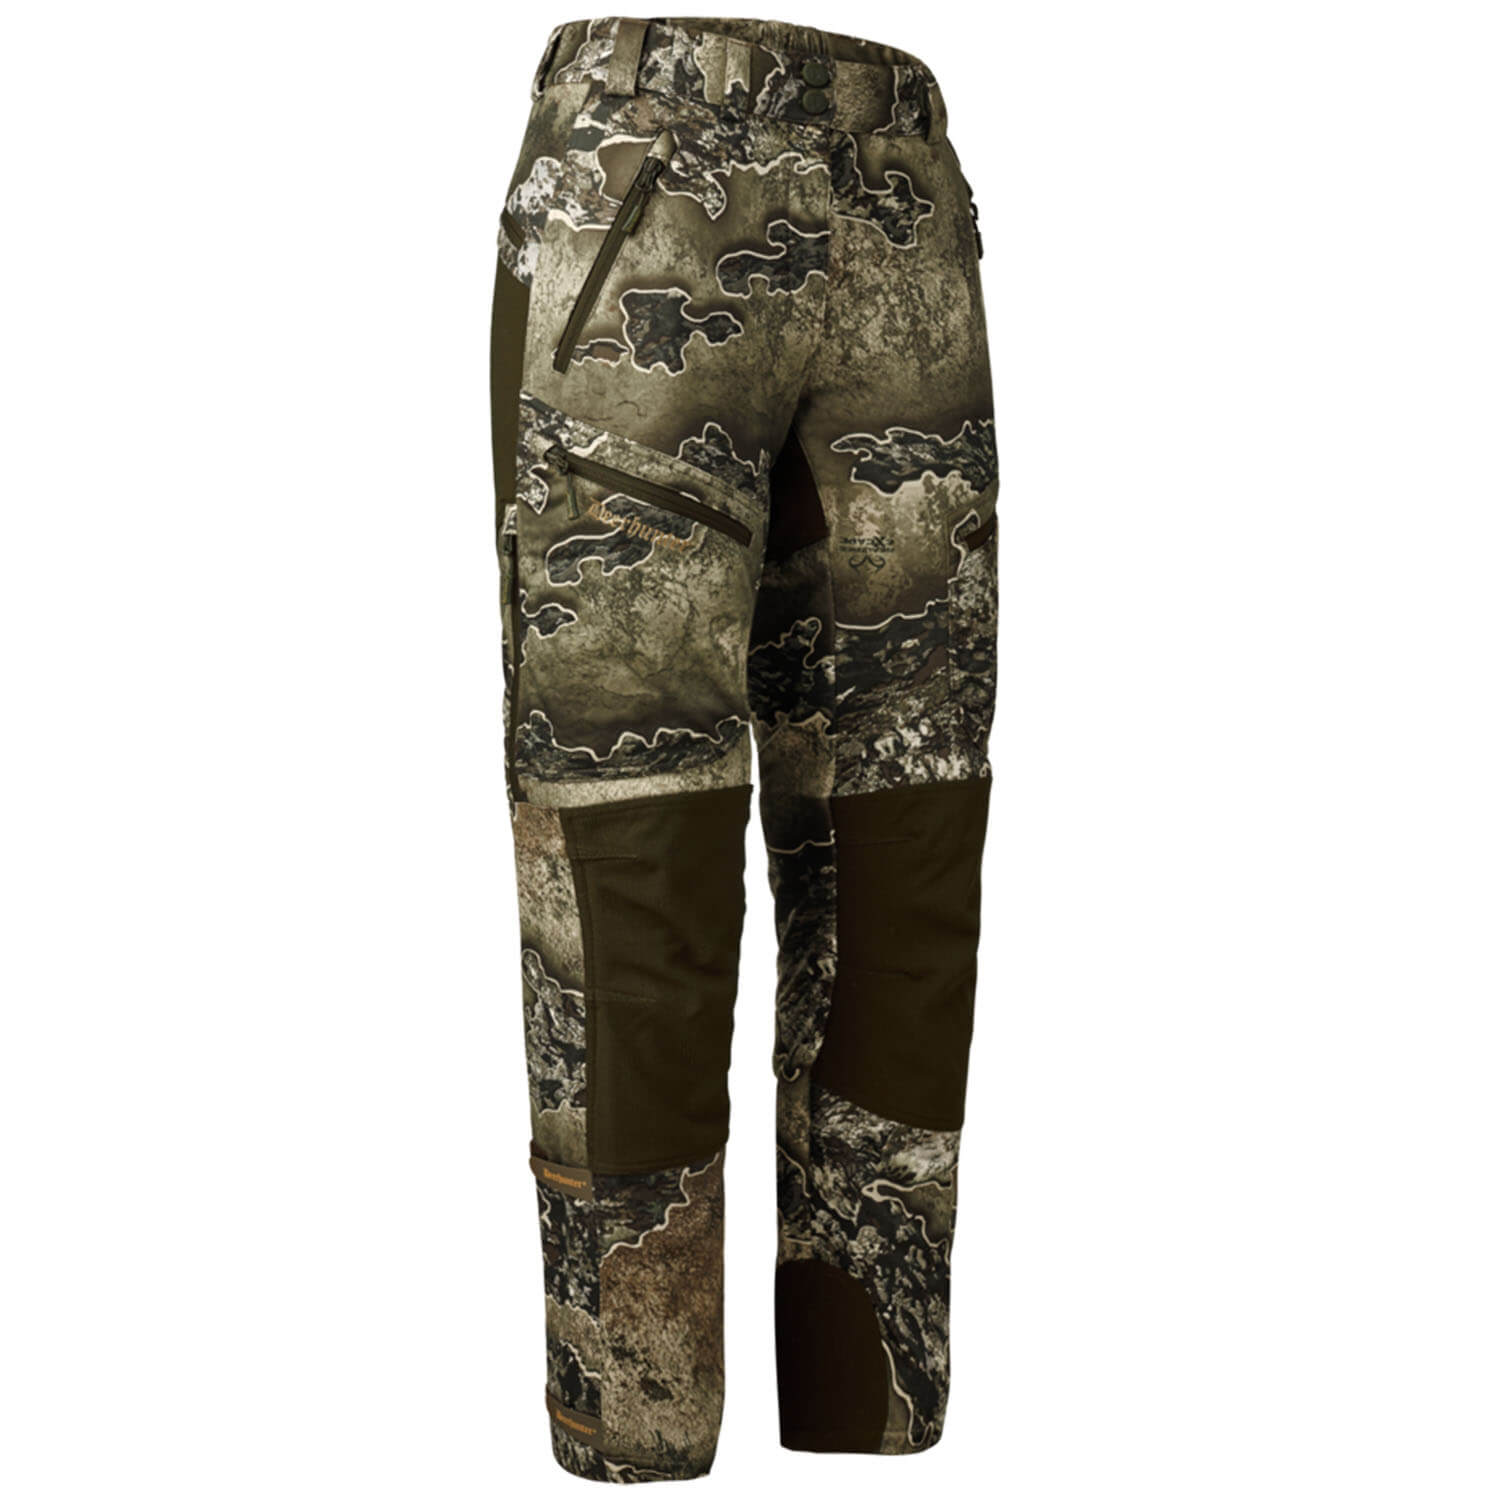 Deerhunter Softshell Trousers Lady Excape (realtree excape) - Hunting Trousers